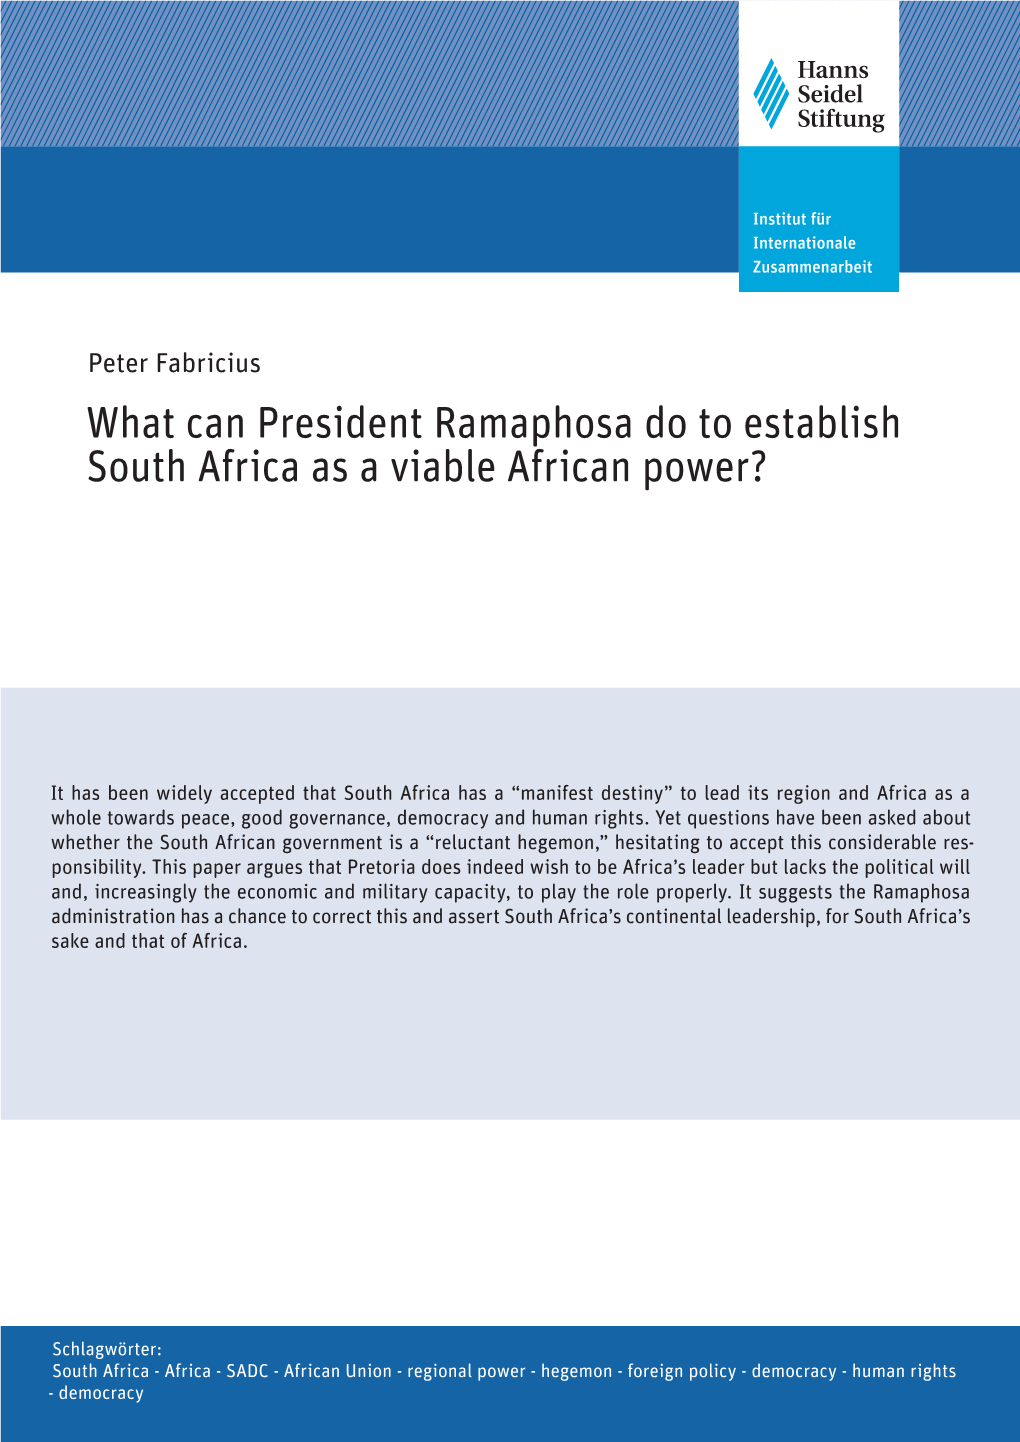 What Can President Ramaphosa Do to Establish South Africa As a Viable African Power?